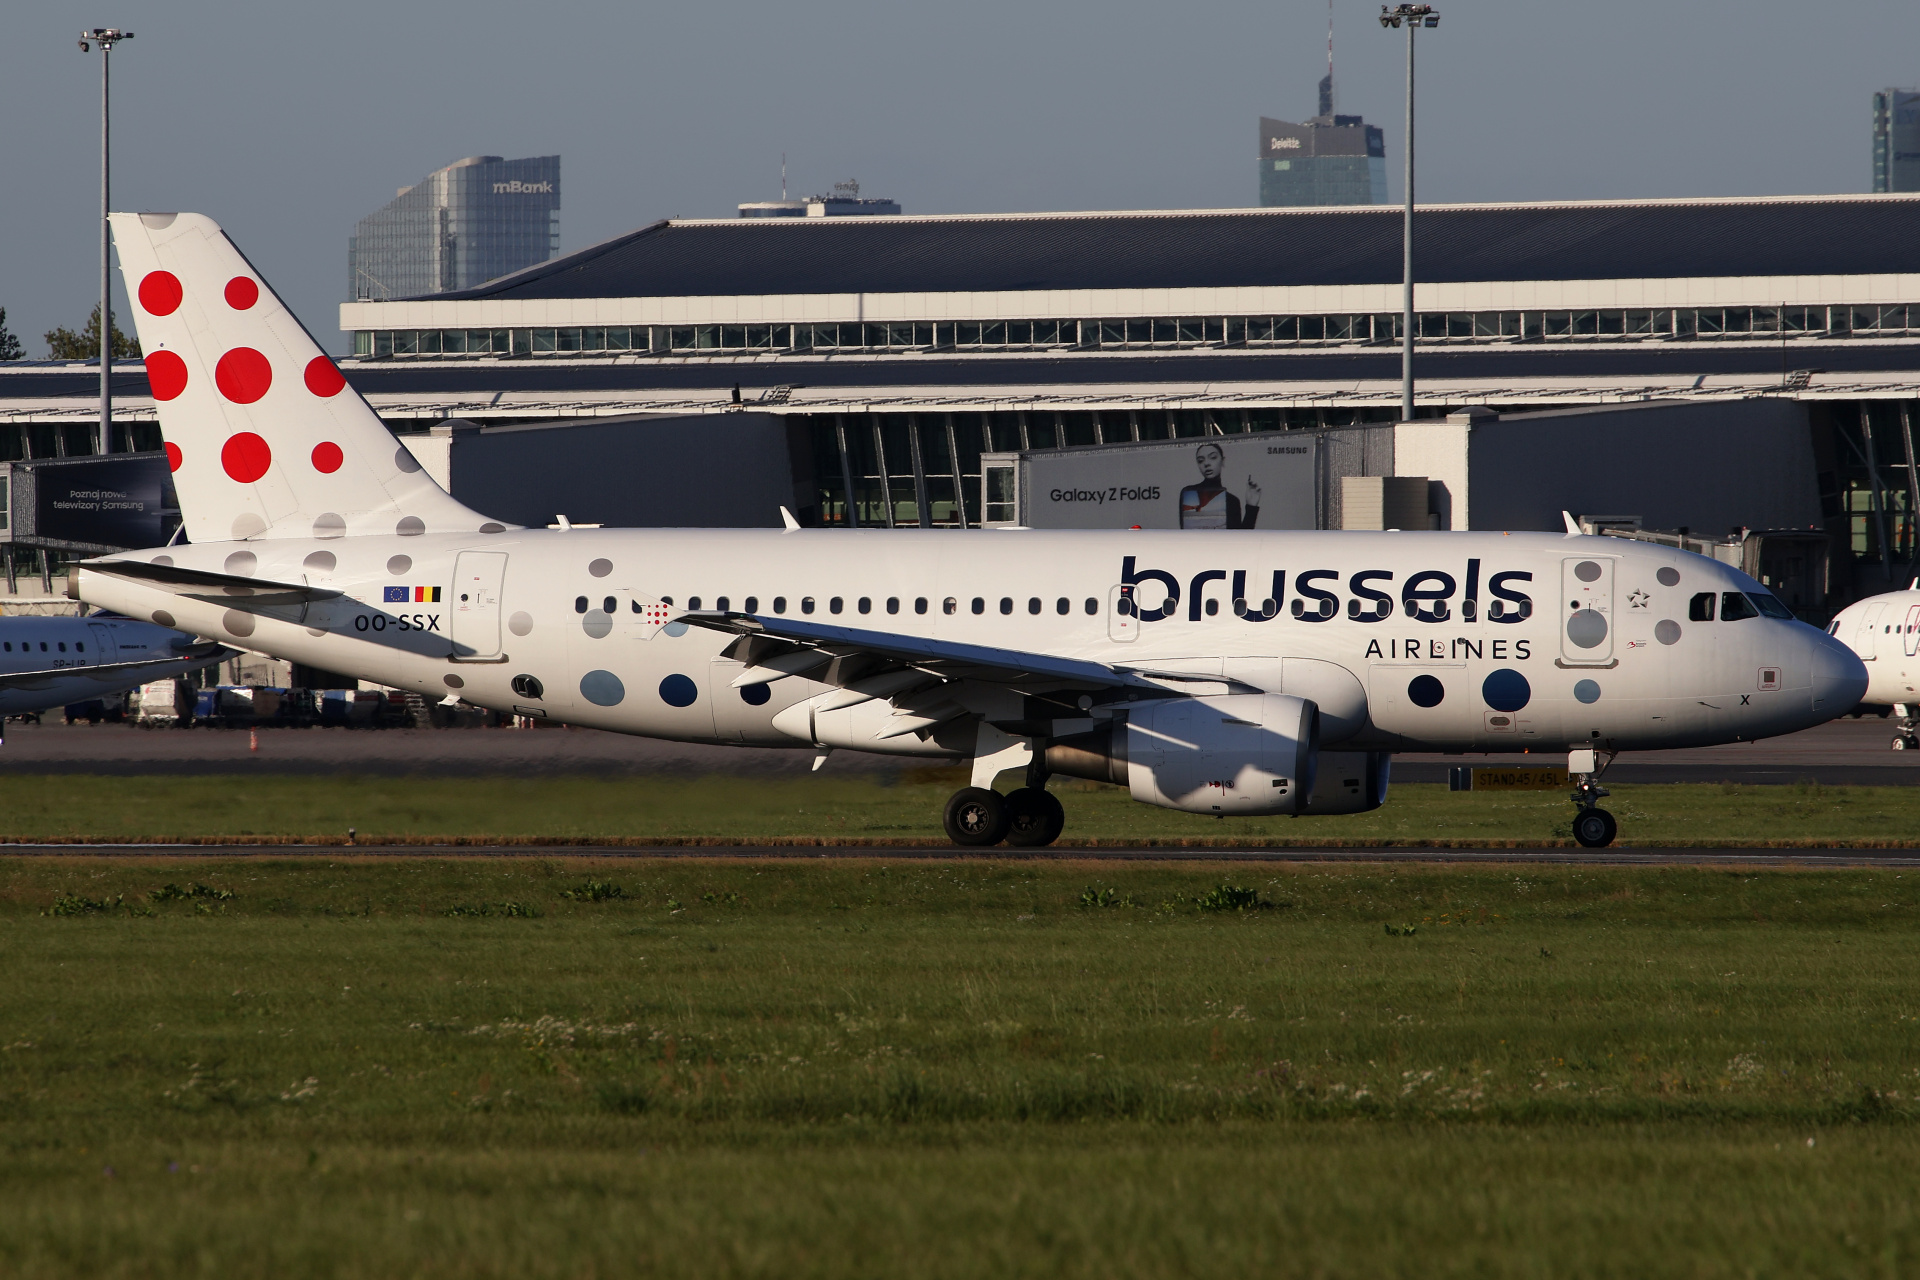 OO-SSX (Aircraft » EPWA Spotting » Airbus A319-100 » Brussels Airlines)